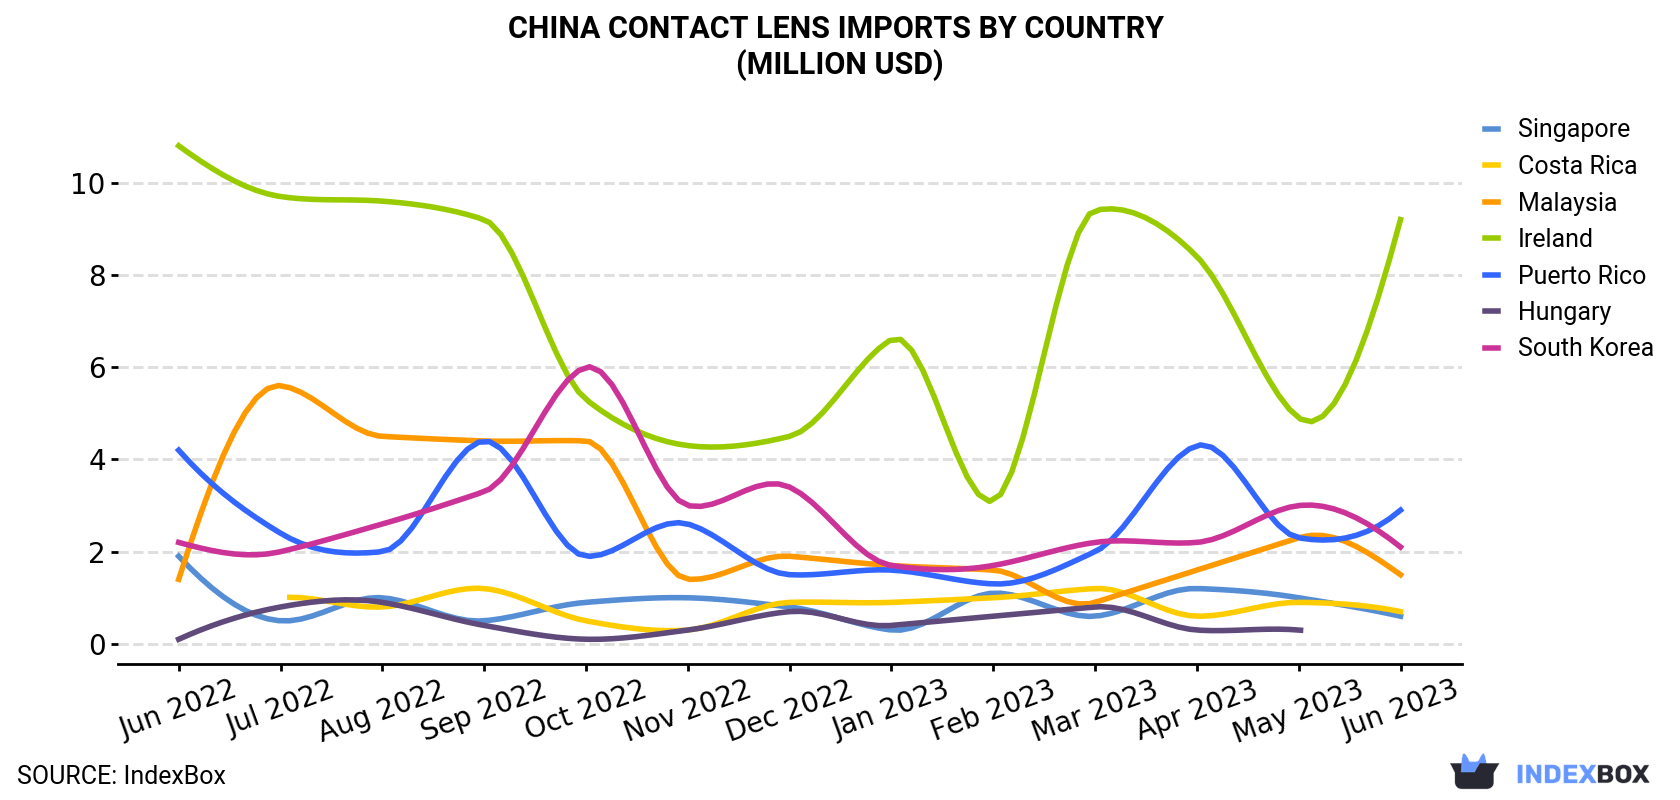 China Contact Lens Imports By Country (Million USD)